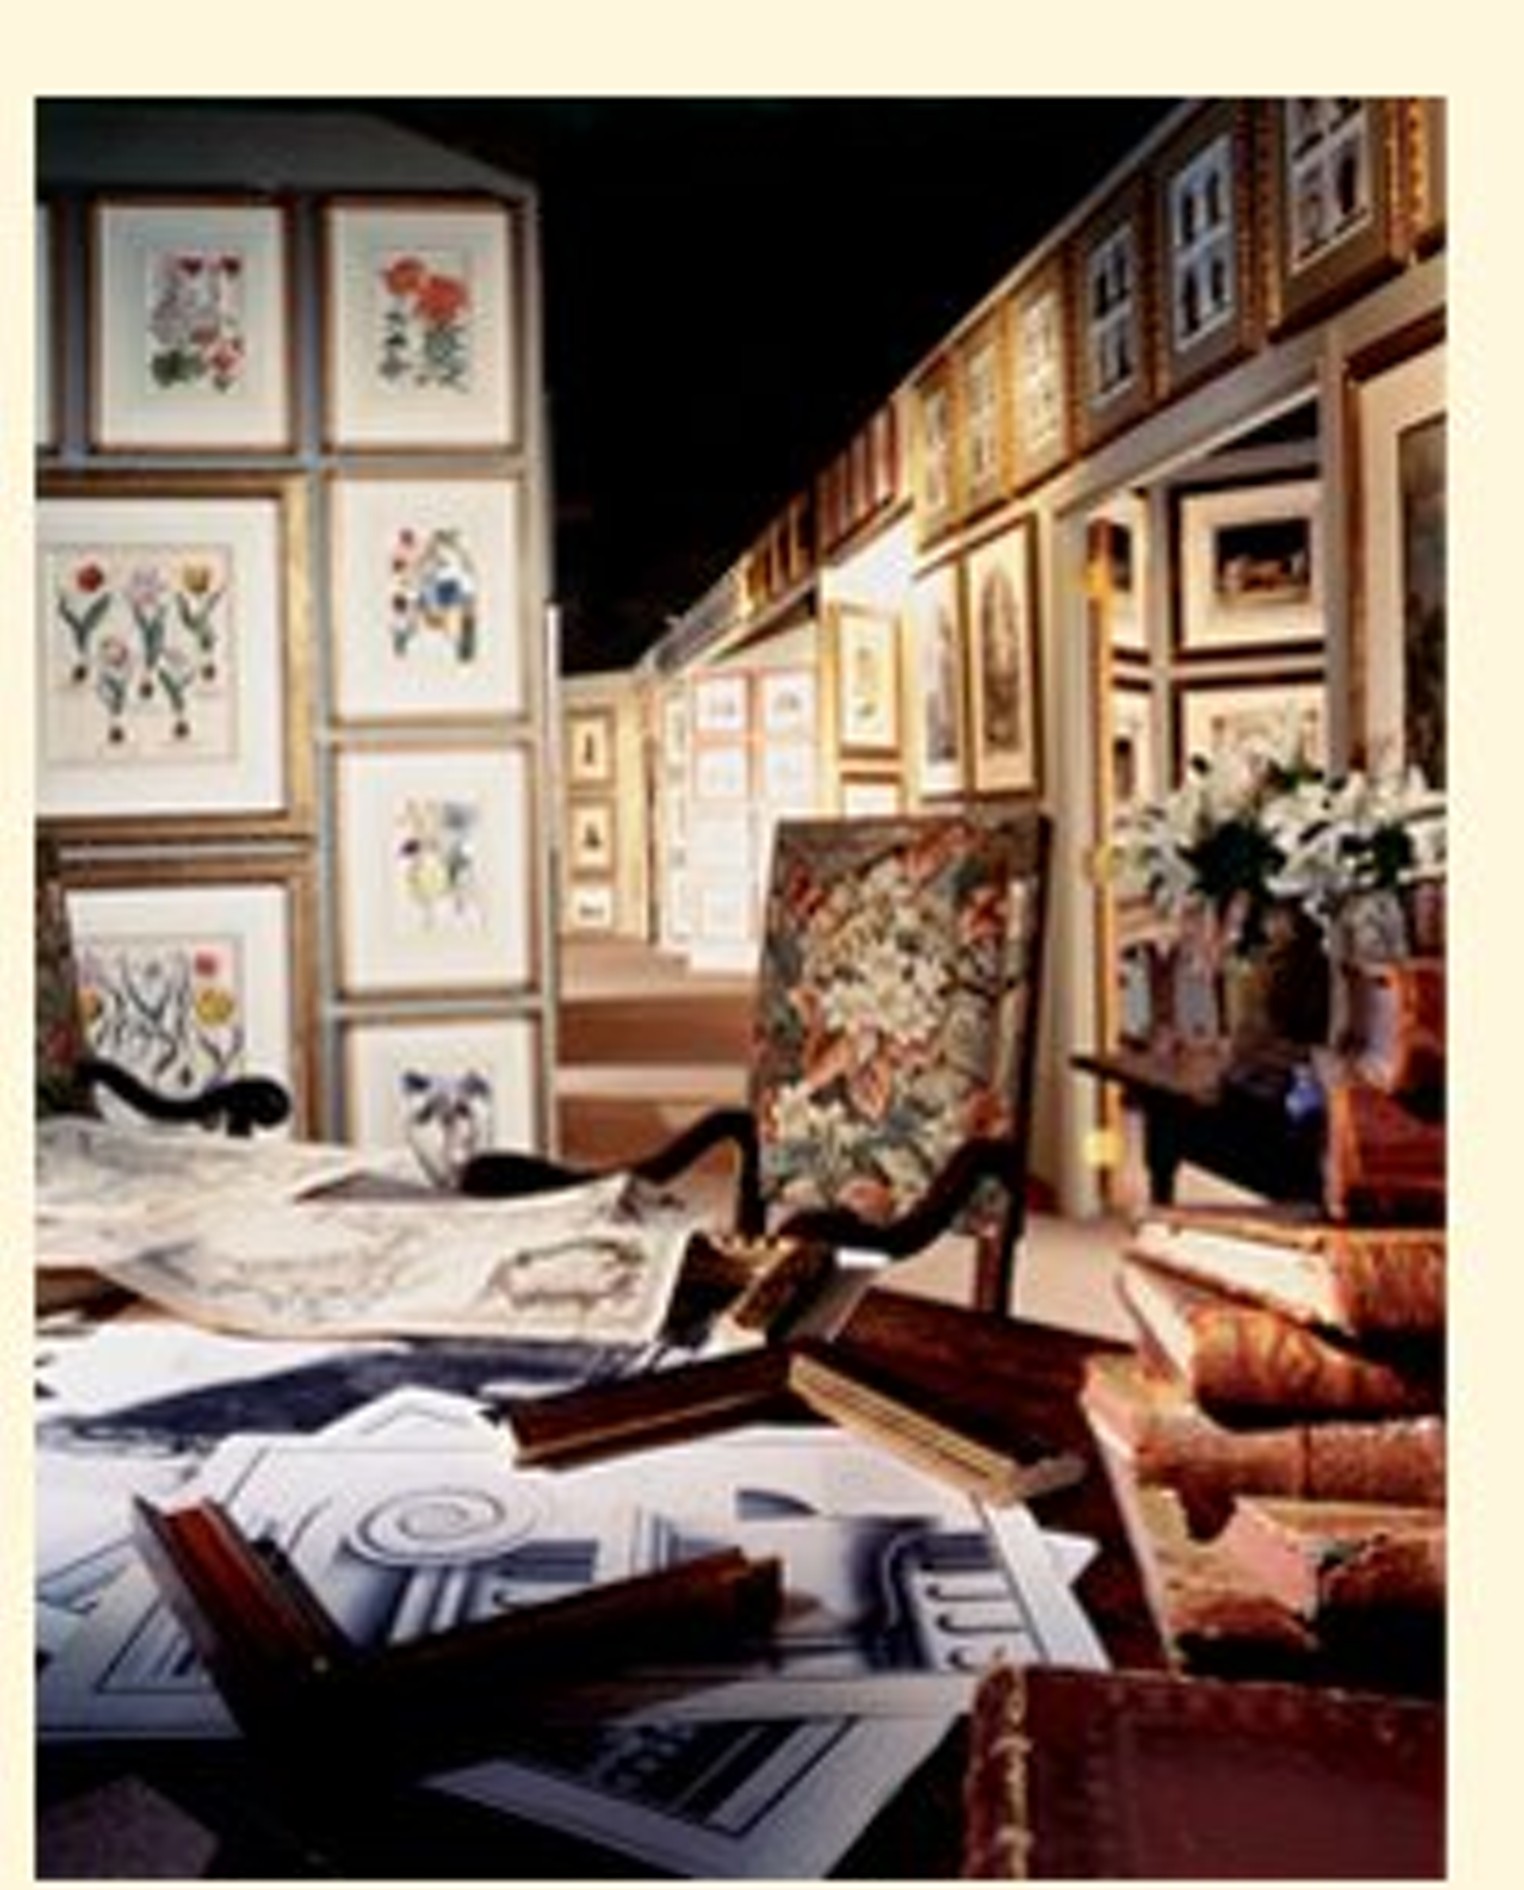 Best Place to Get Antique Prints and Cool Old Maps 2003 Beaux Arts Best of Dallas® 2020 Best Restaurants, Bars, Clubs, Music and Stores in Dallas Dallas Observer image photo